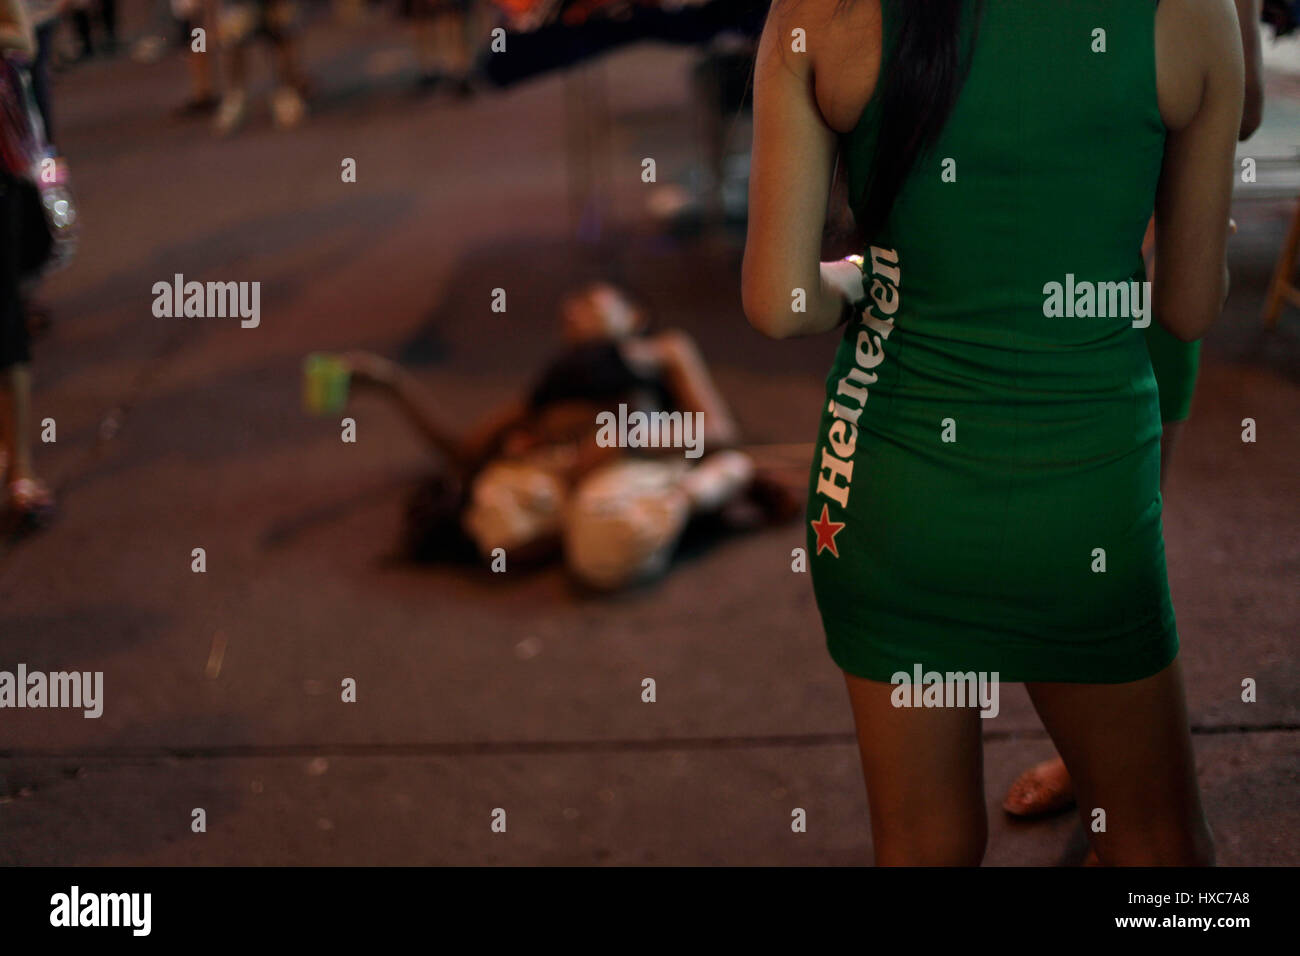 A Heineken beer promo lady in a short dress somewhere in Thailand. Stock Photo